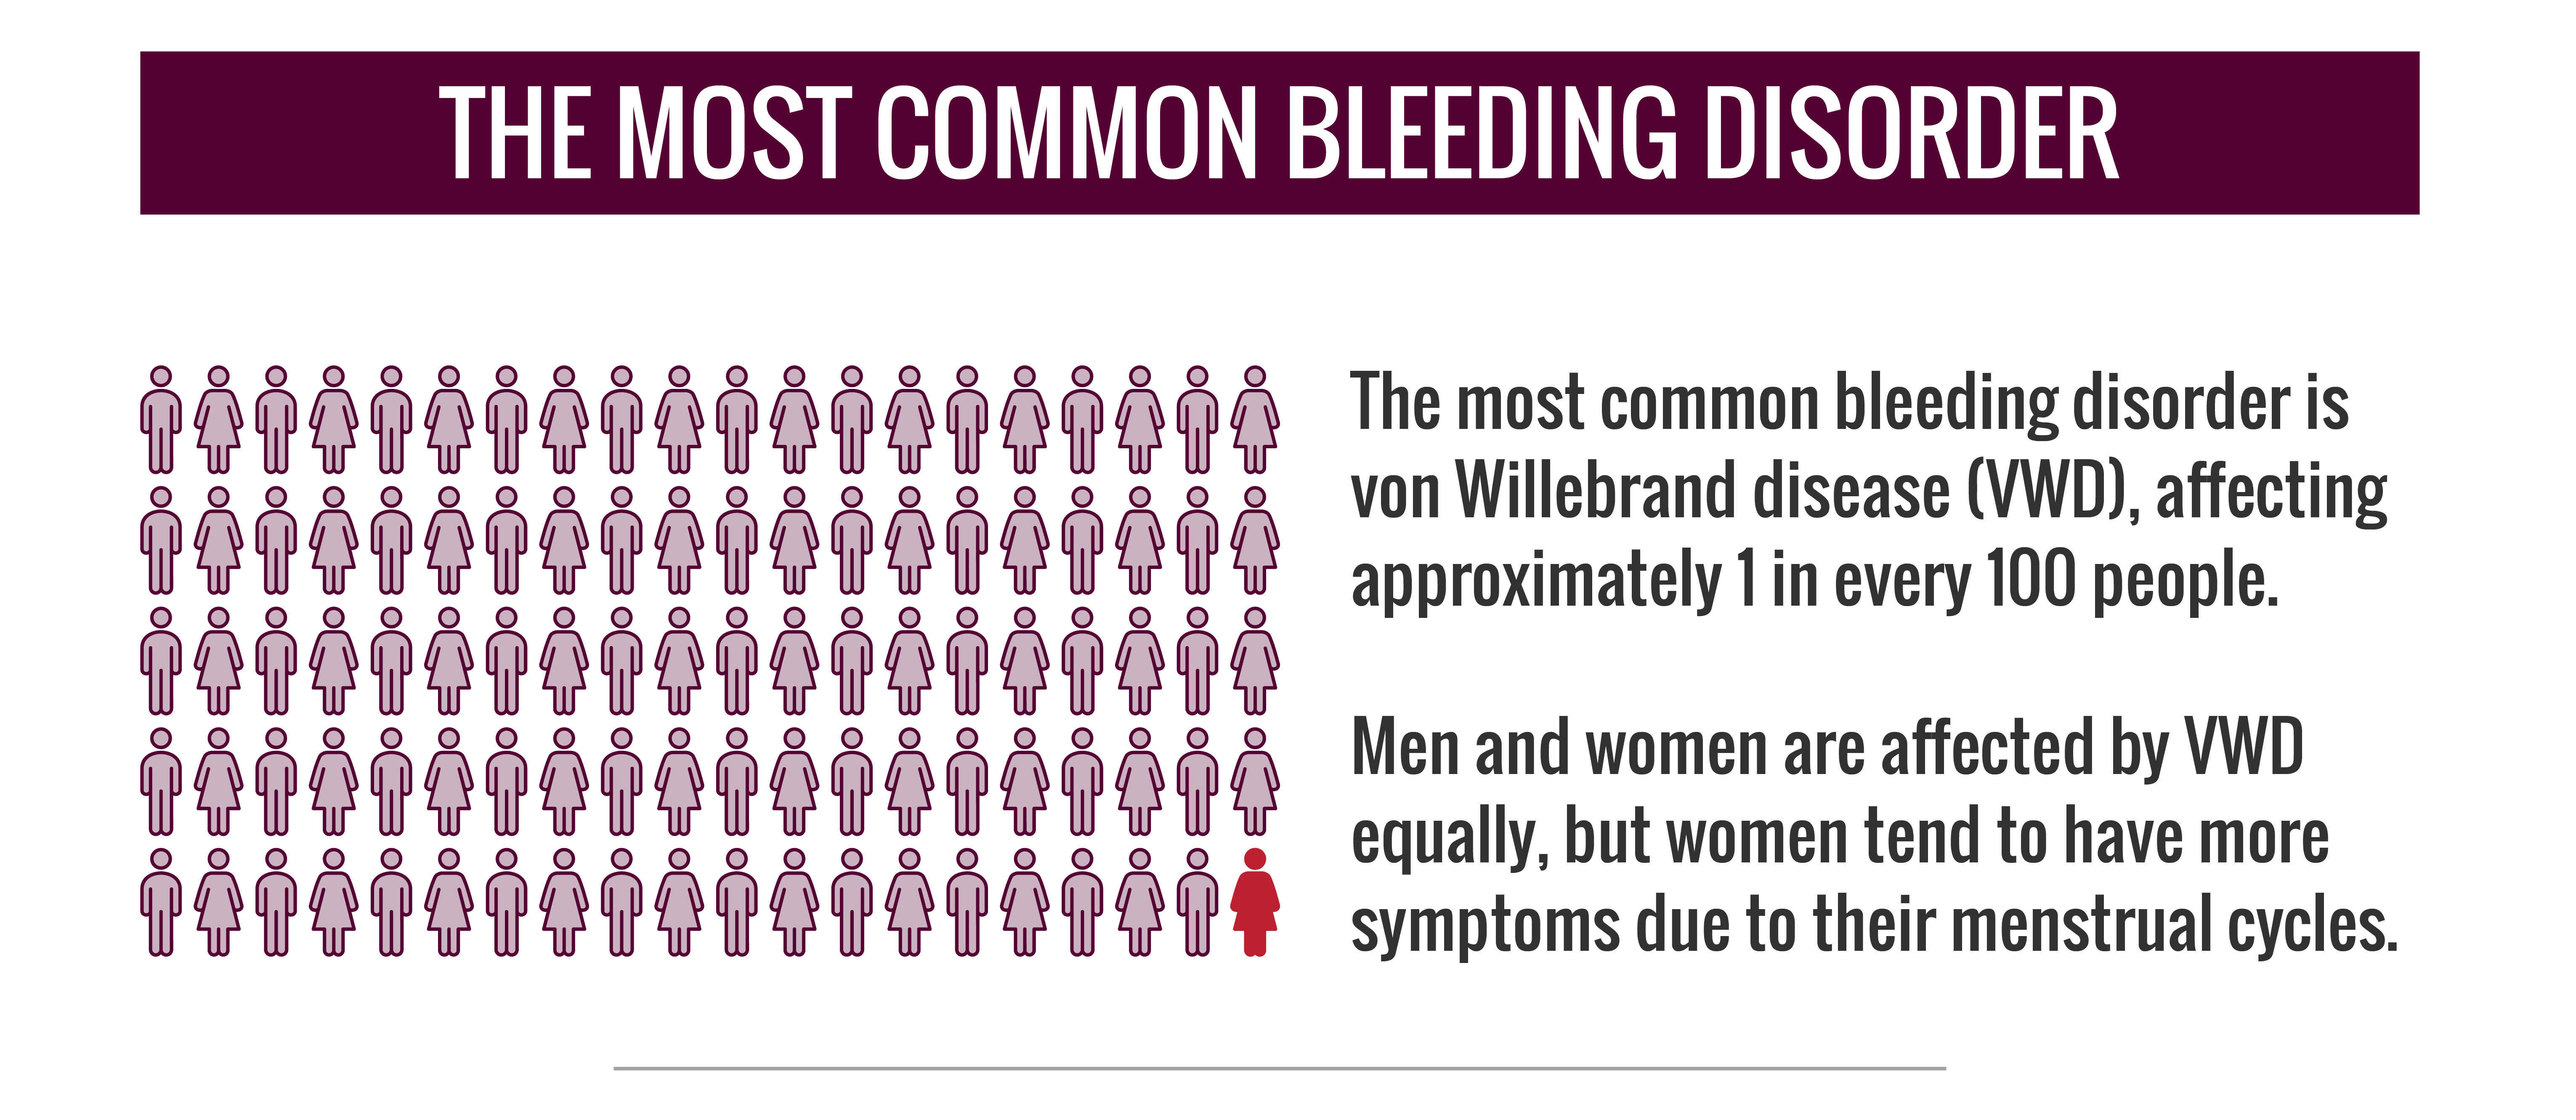 Fast Facts 5  - The Most Common Bleeding Disorder- Von Willebrand Disease